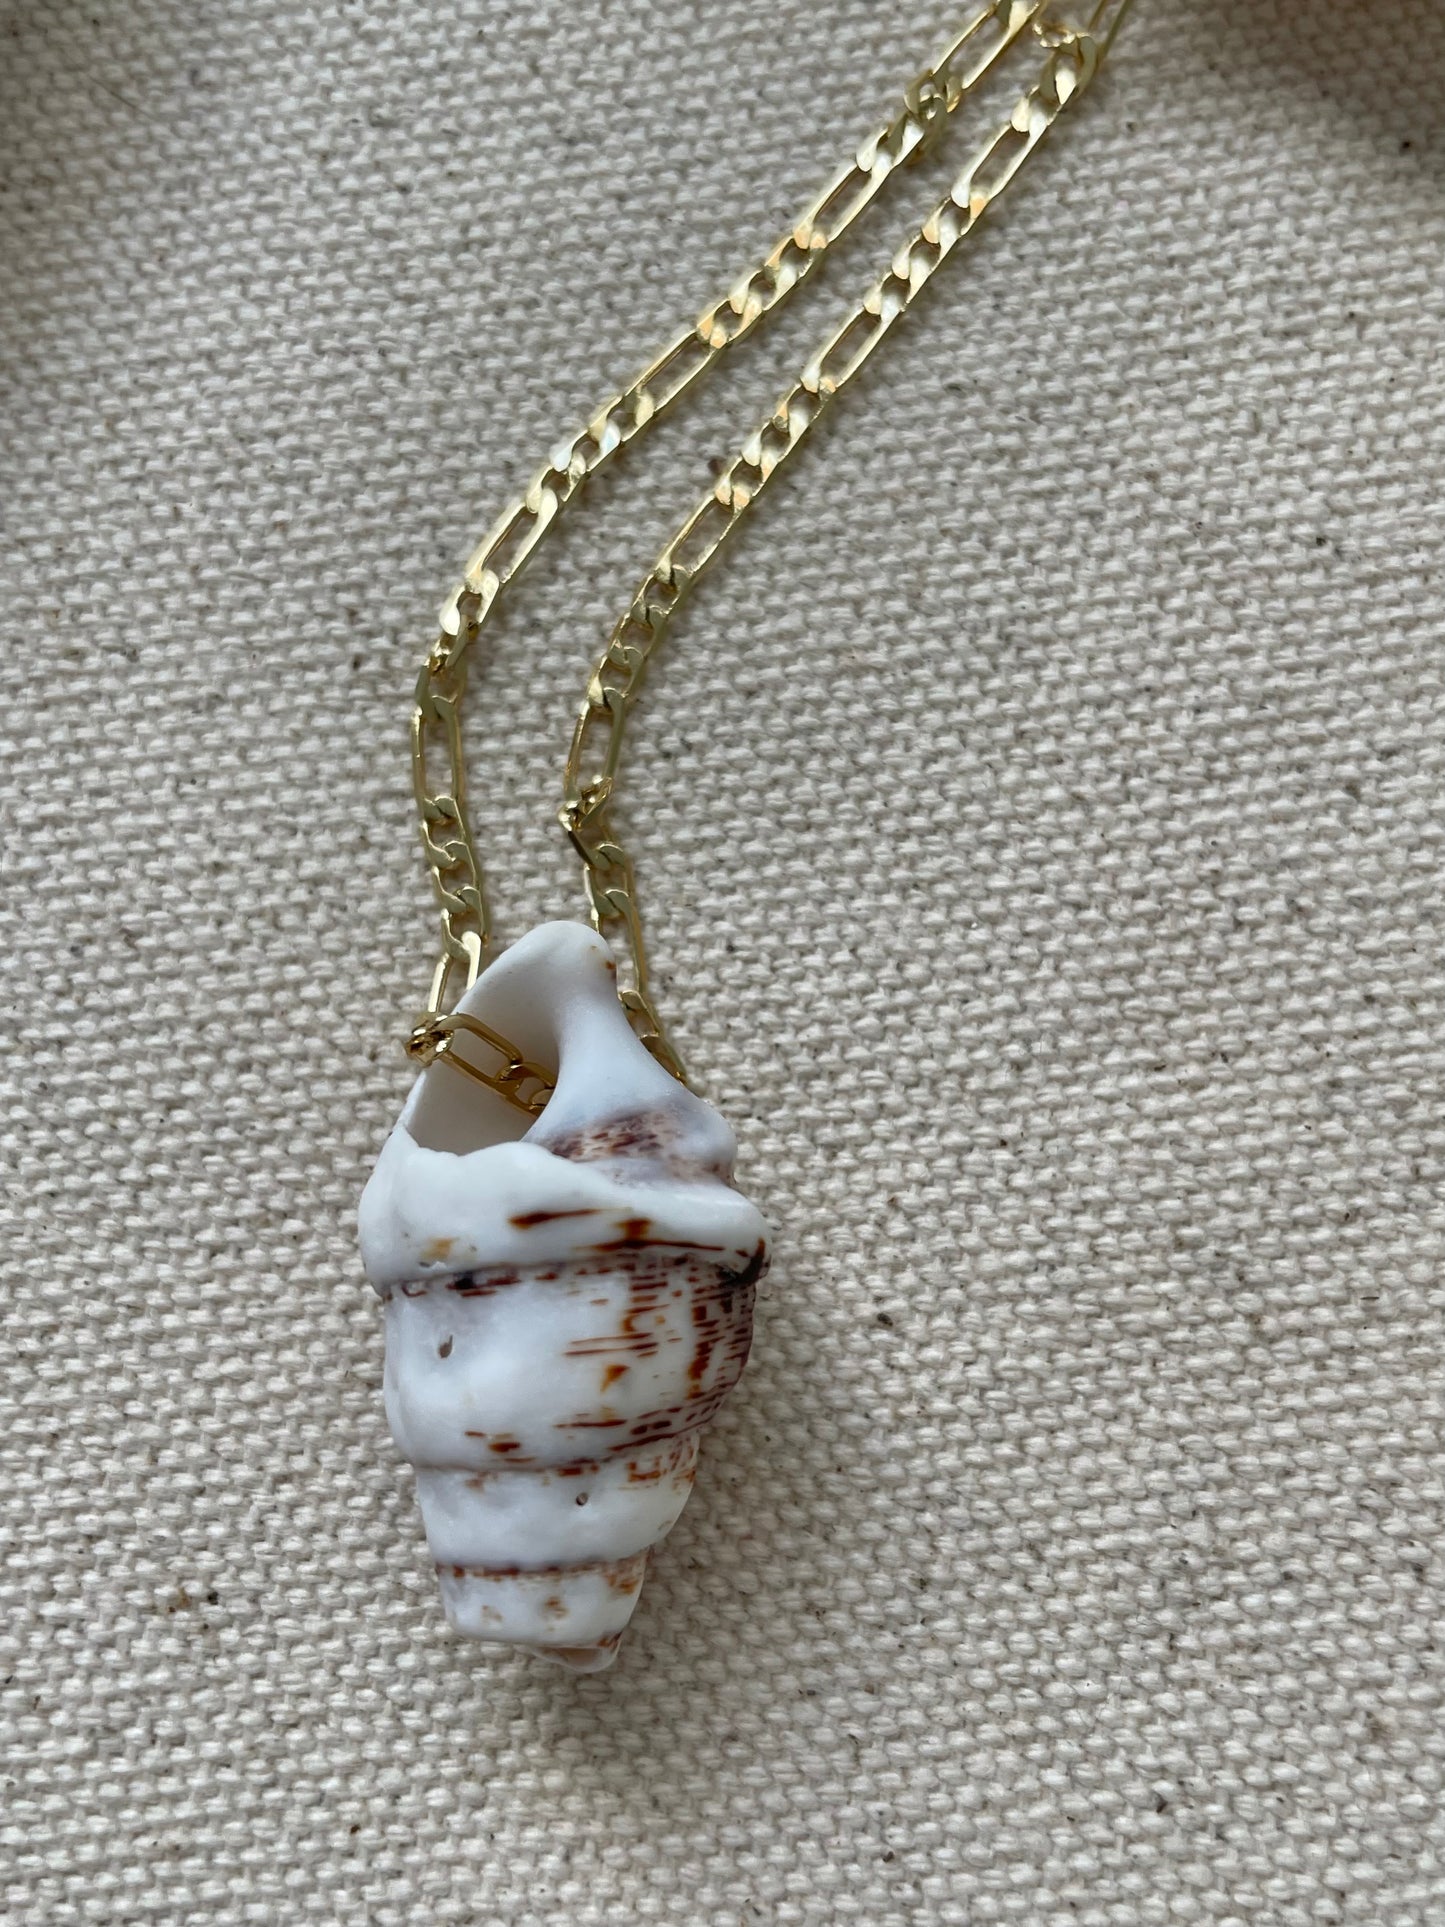 No 2 Shell on Gold Chain